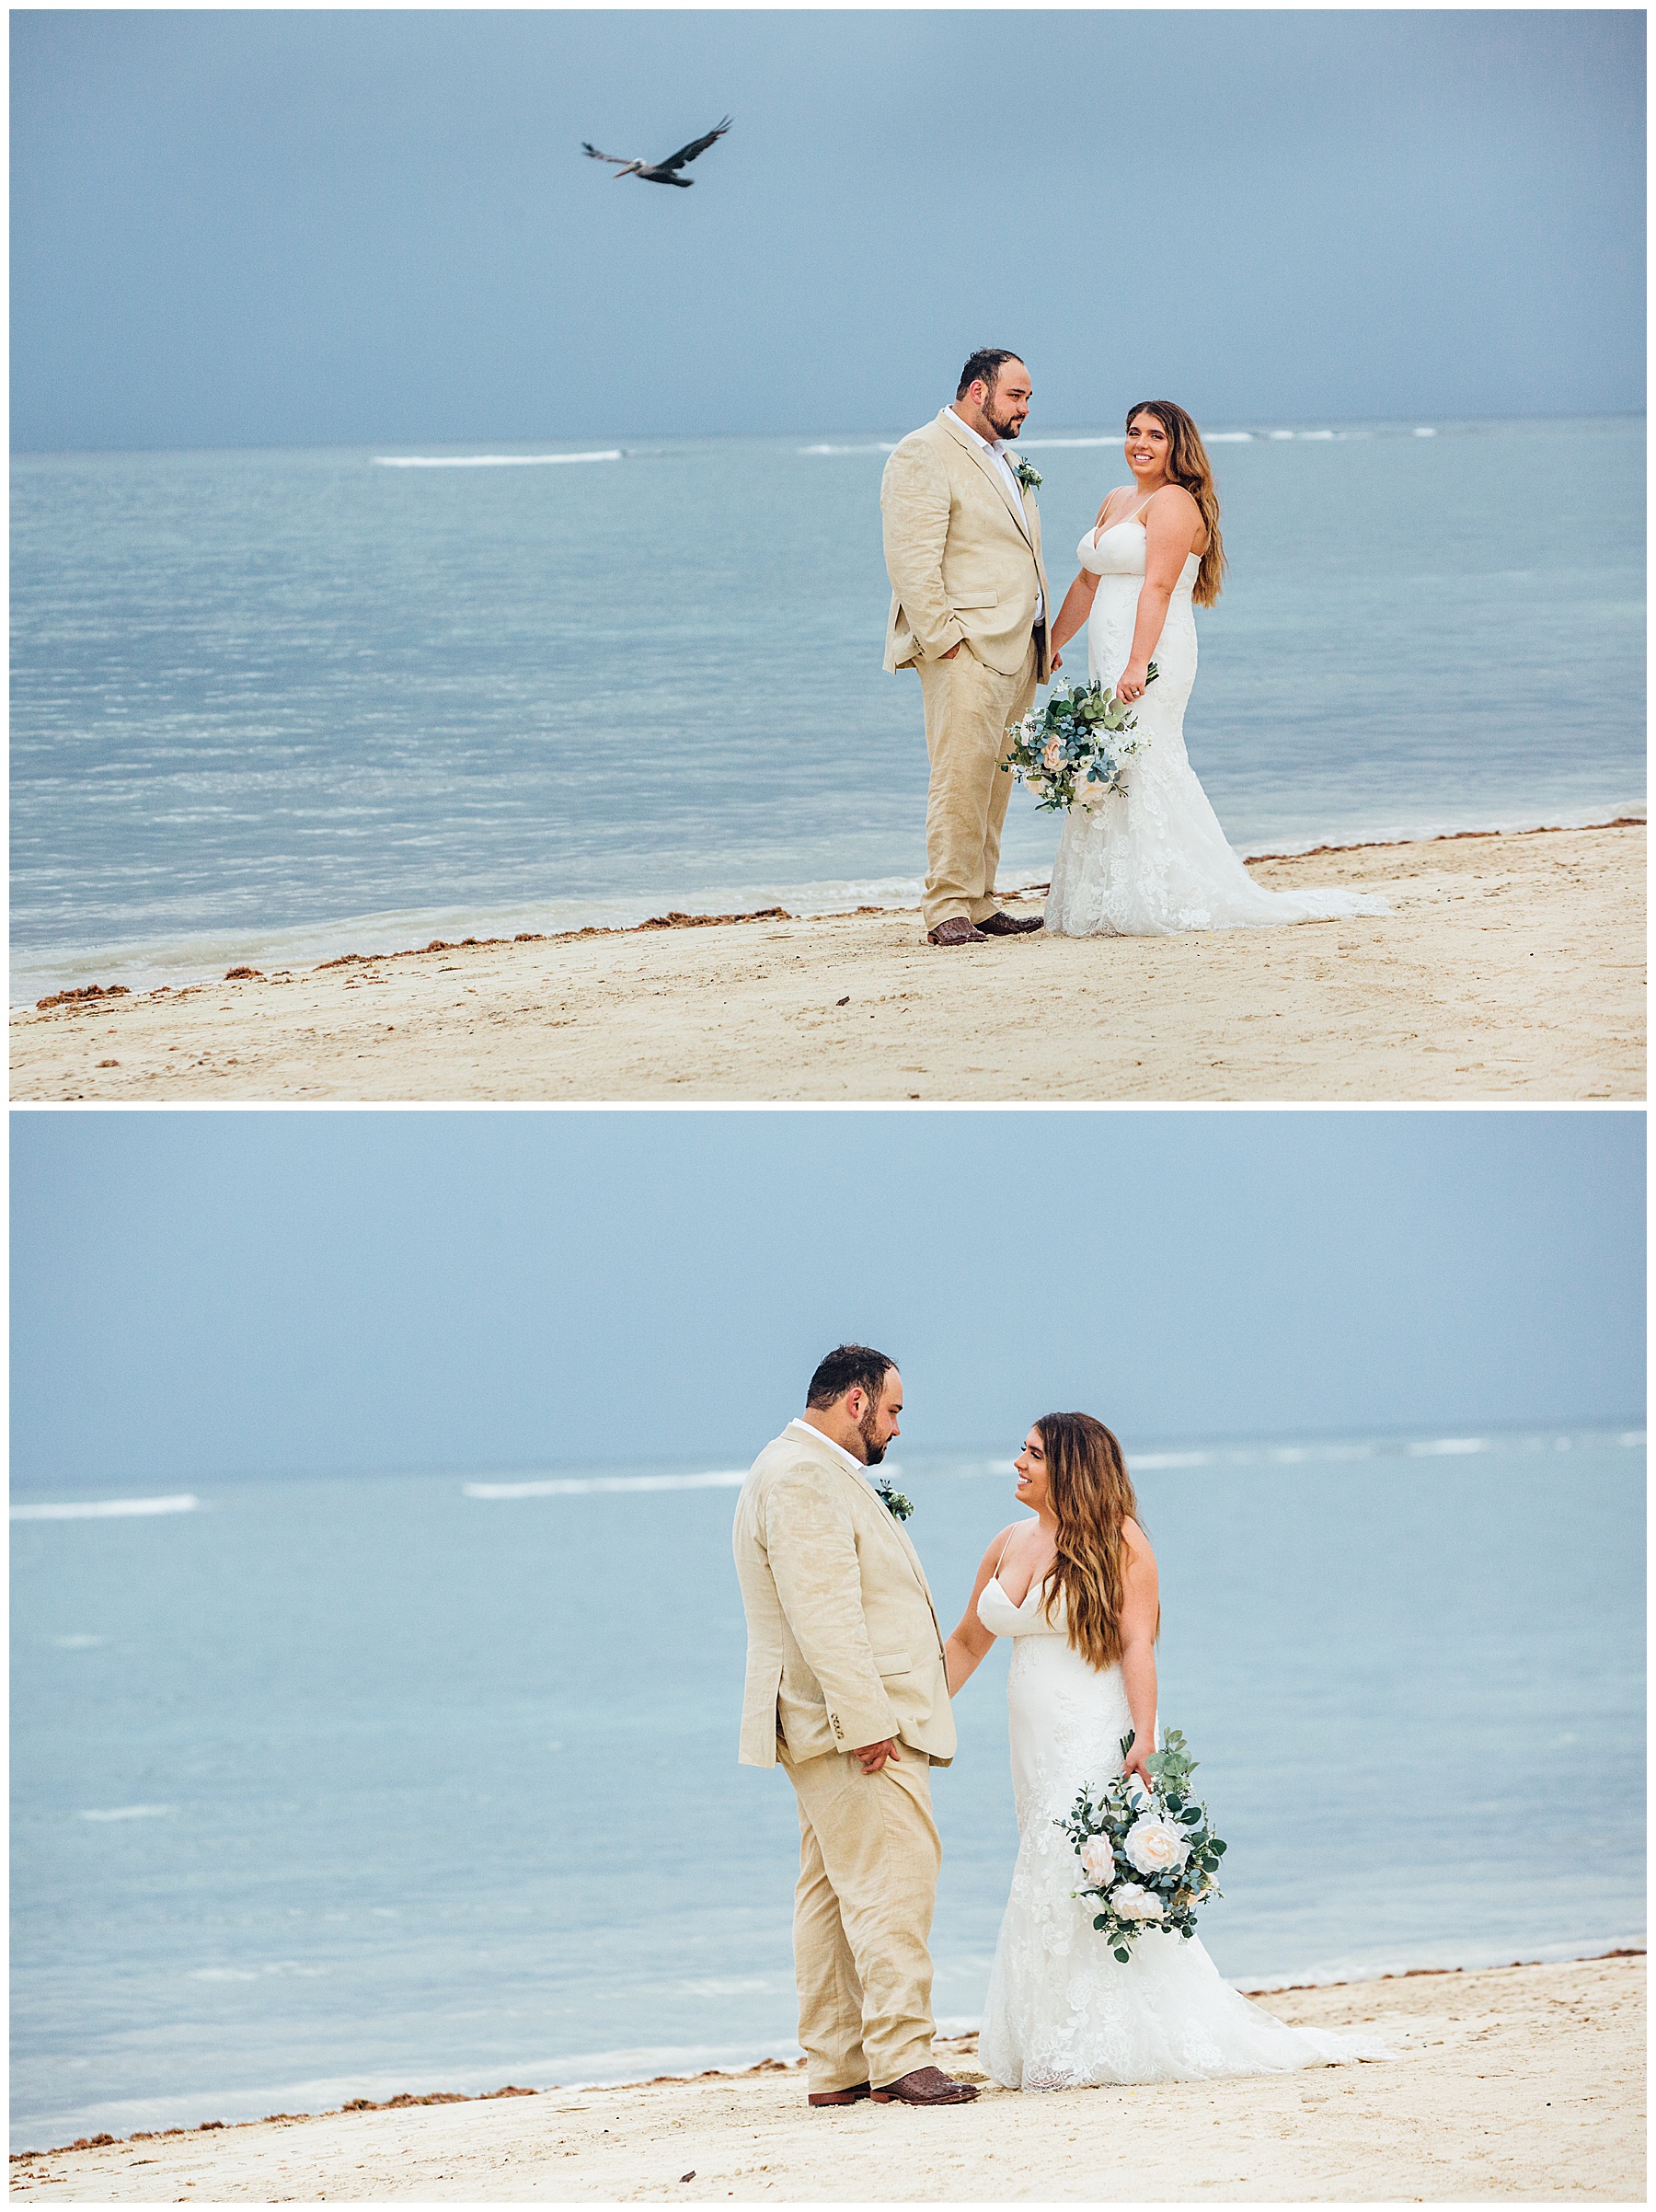 Bride and Groom on beach in Jamaica